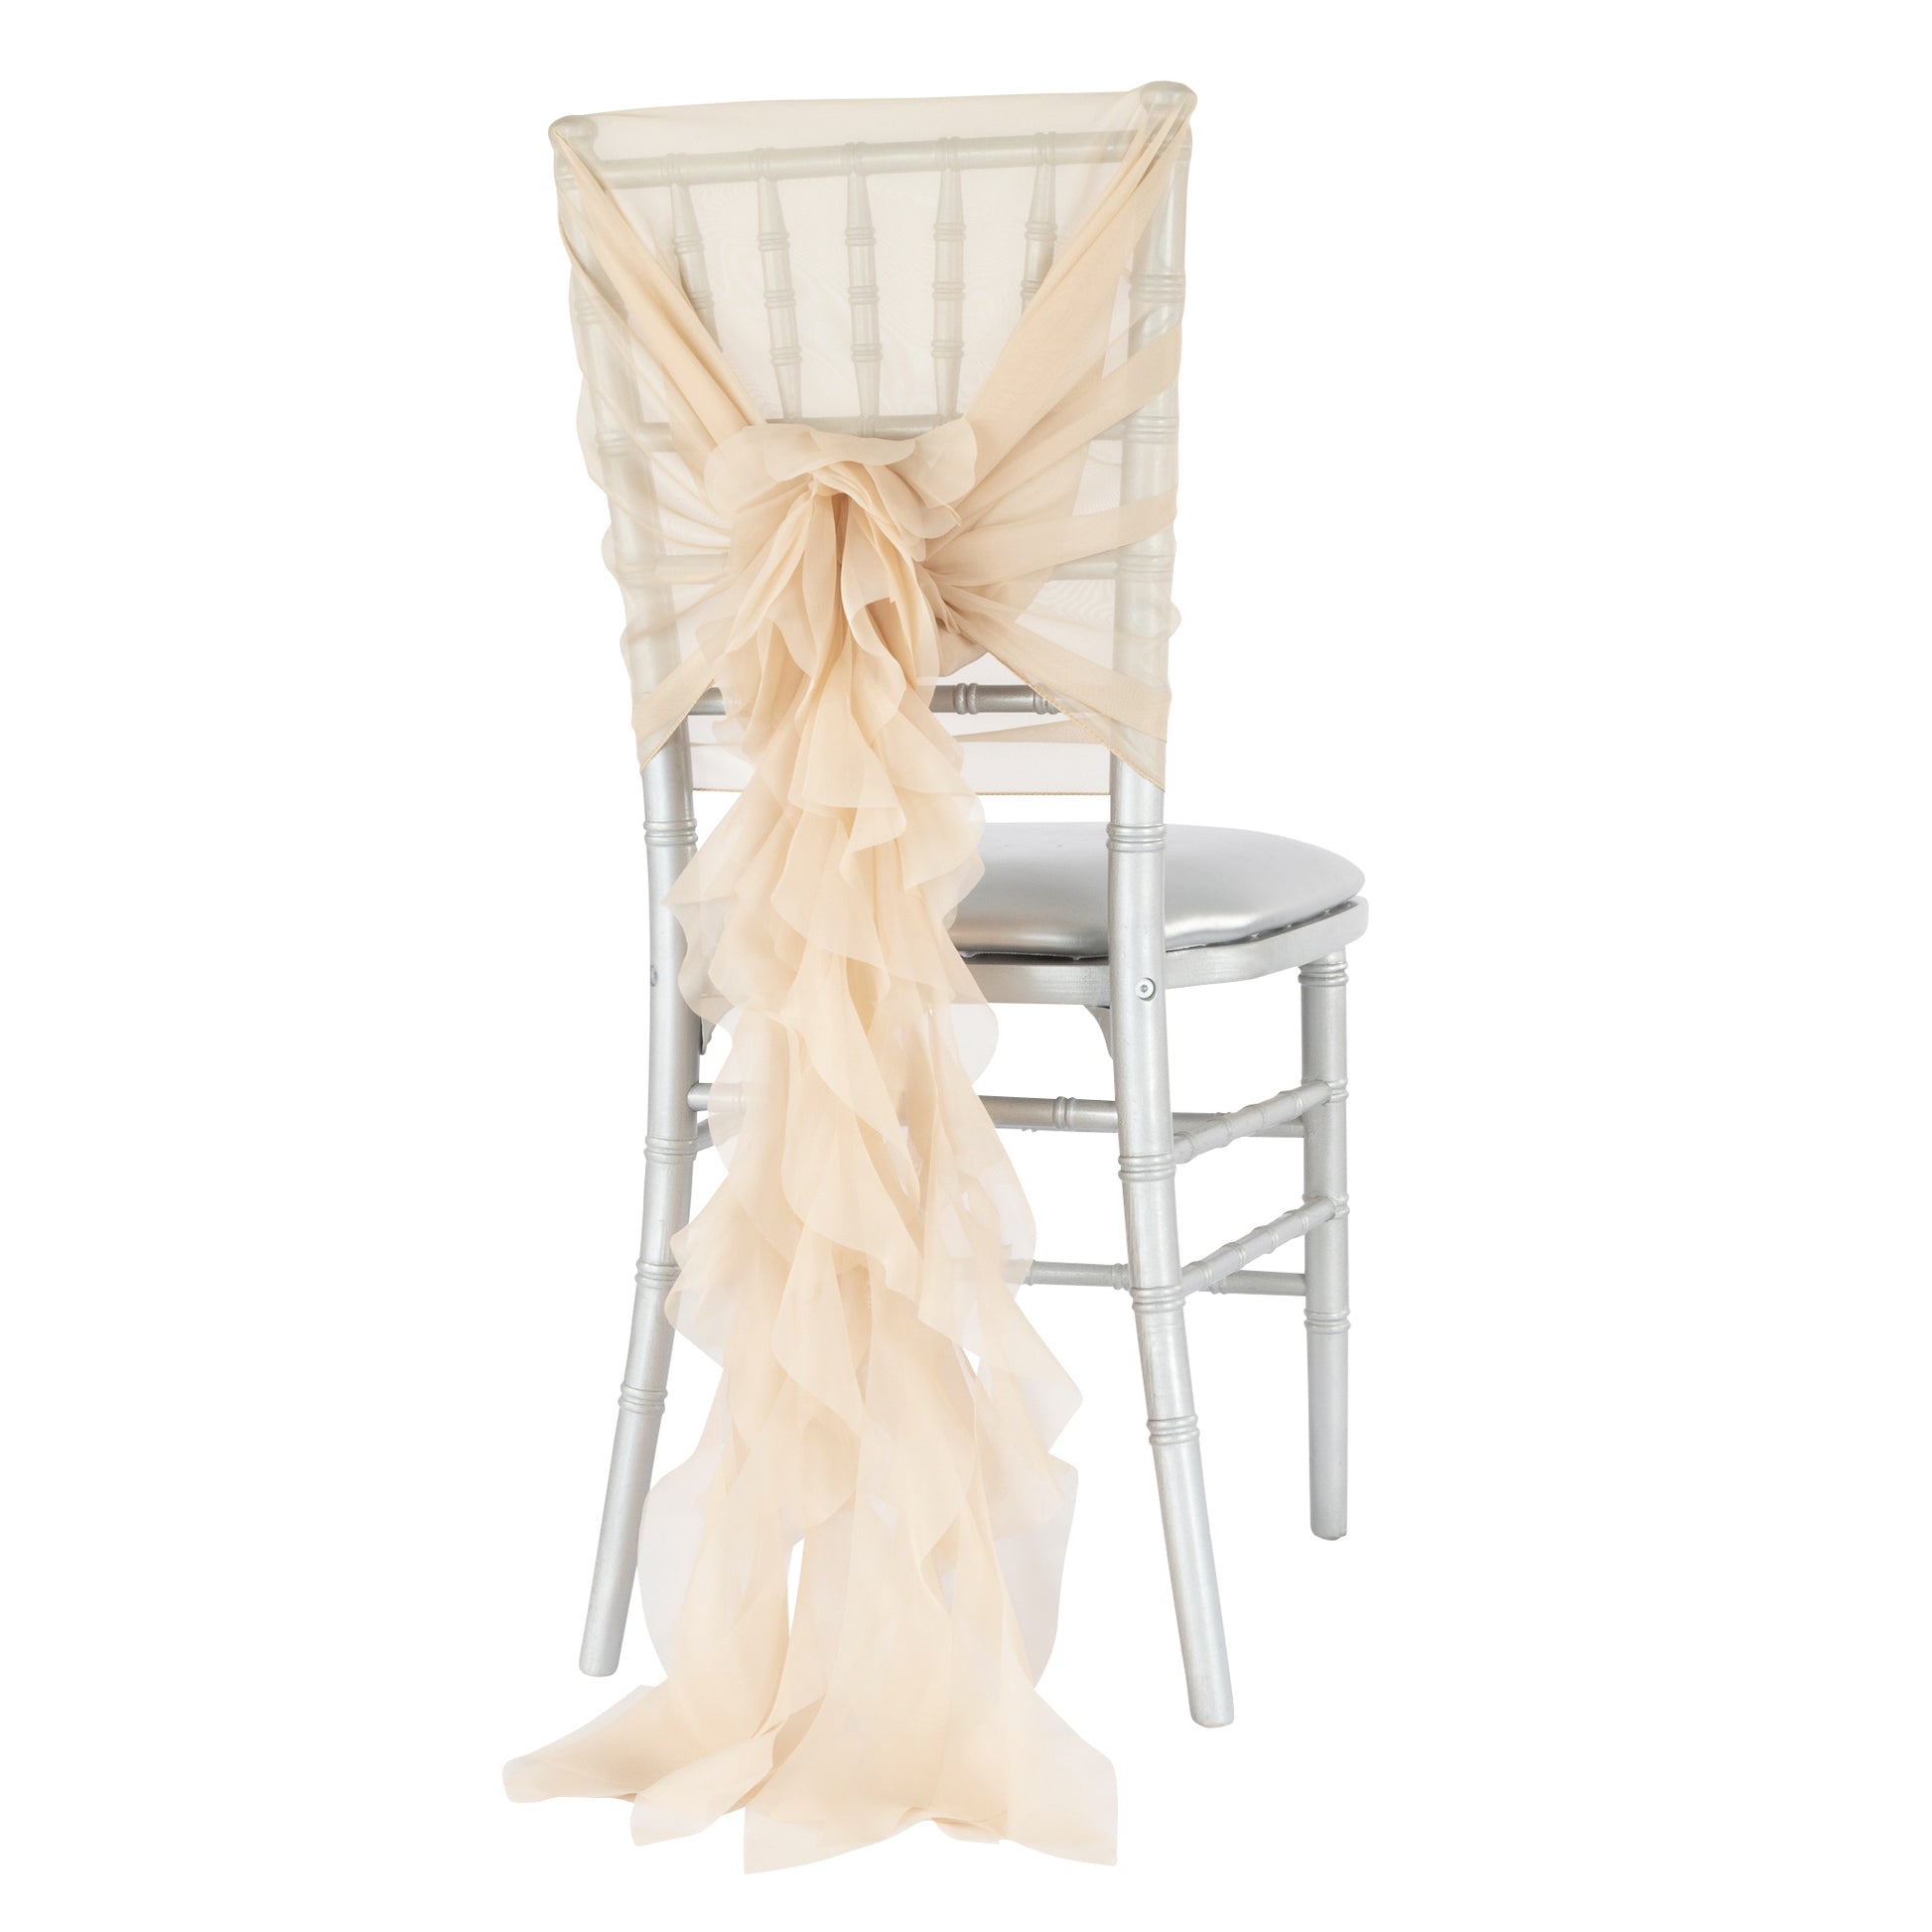 1 Set of Soft Curly Willow Ruffles Chair Sash & Cap - Champagne - CV Linens